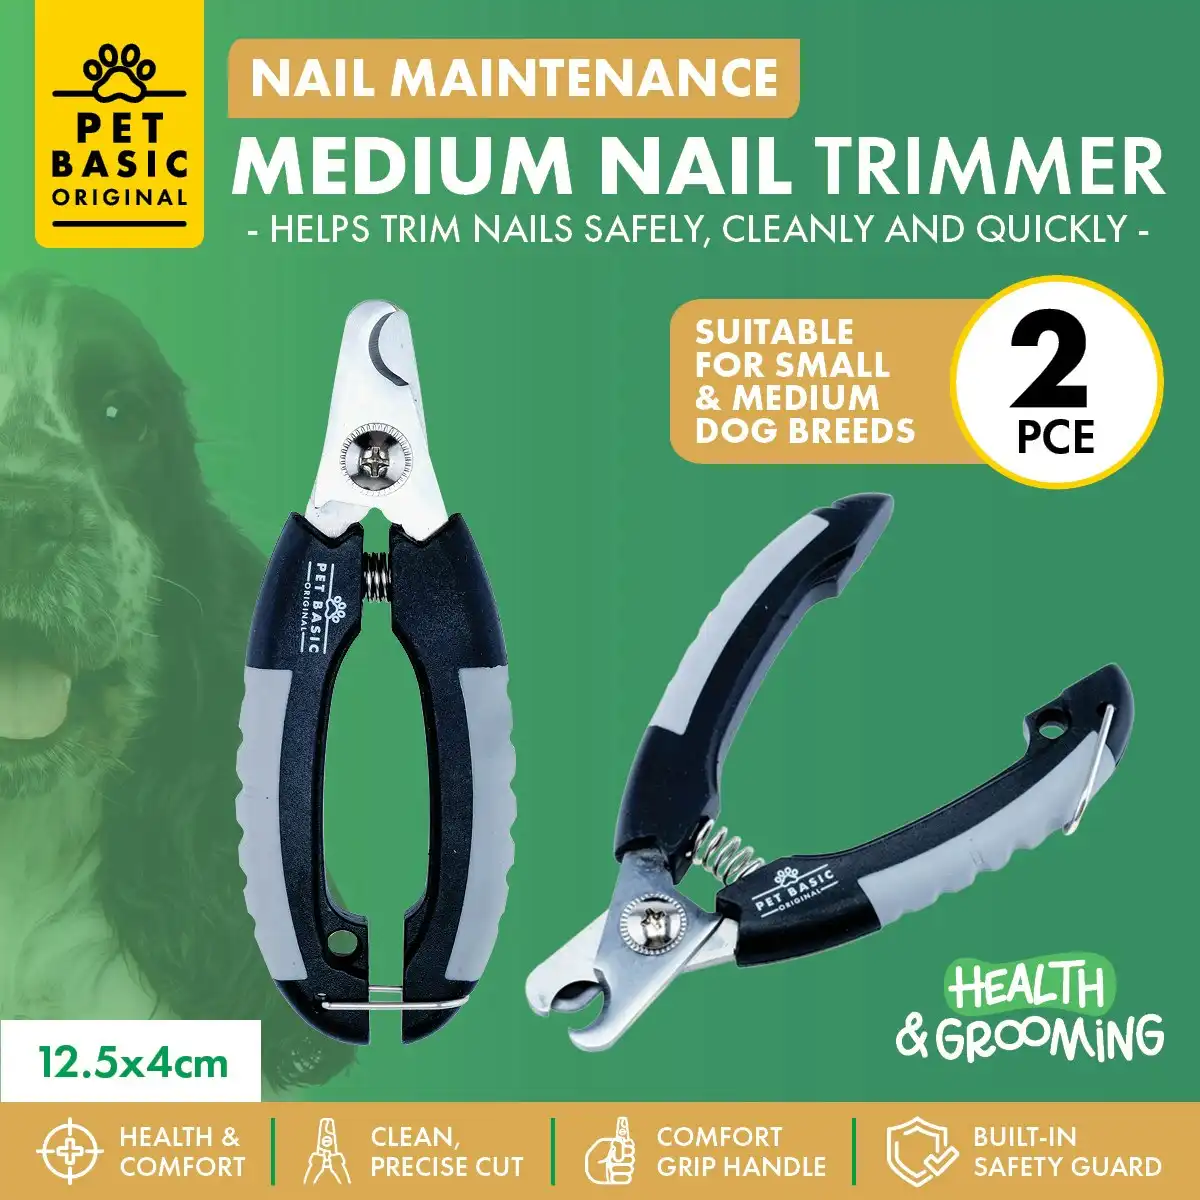 Pet Basic 2PCE Nail Trimmers Small/Medium Breeds Built-In Safety Guard 12.5cm